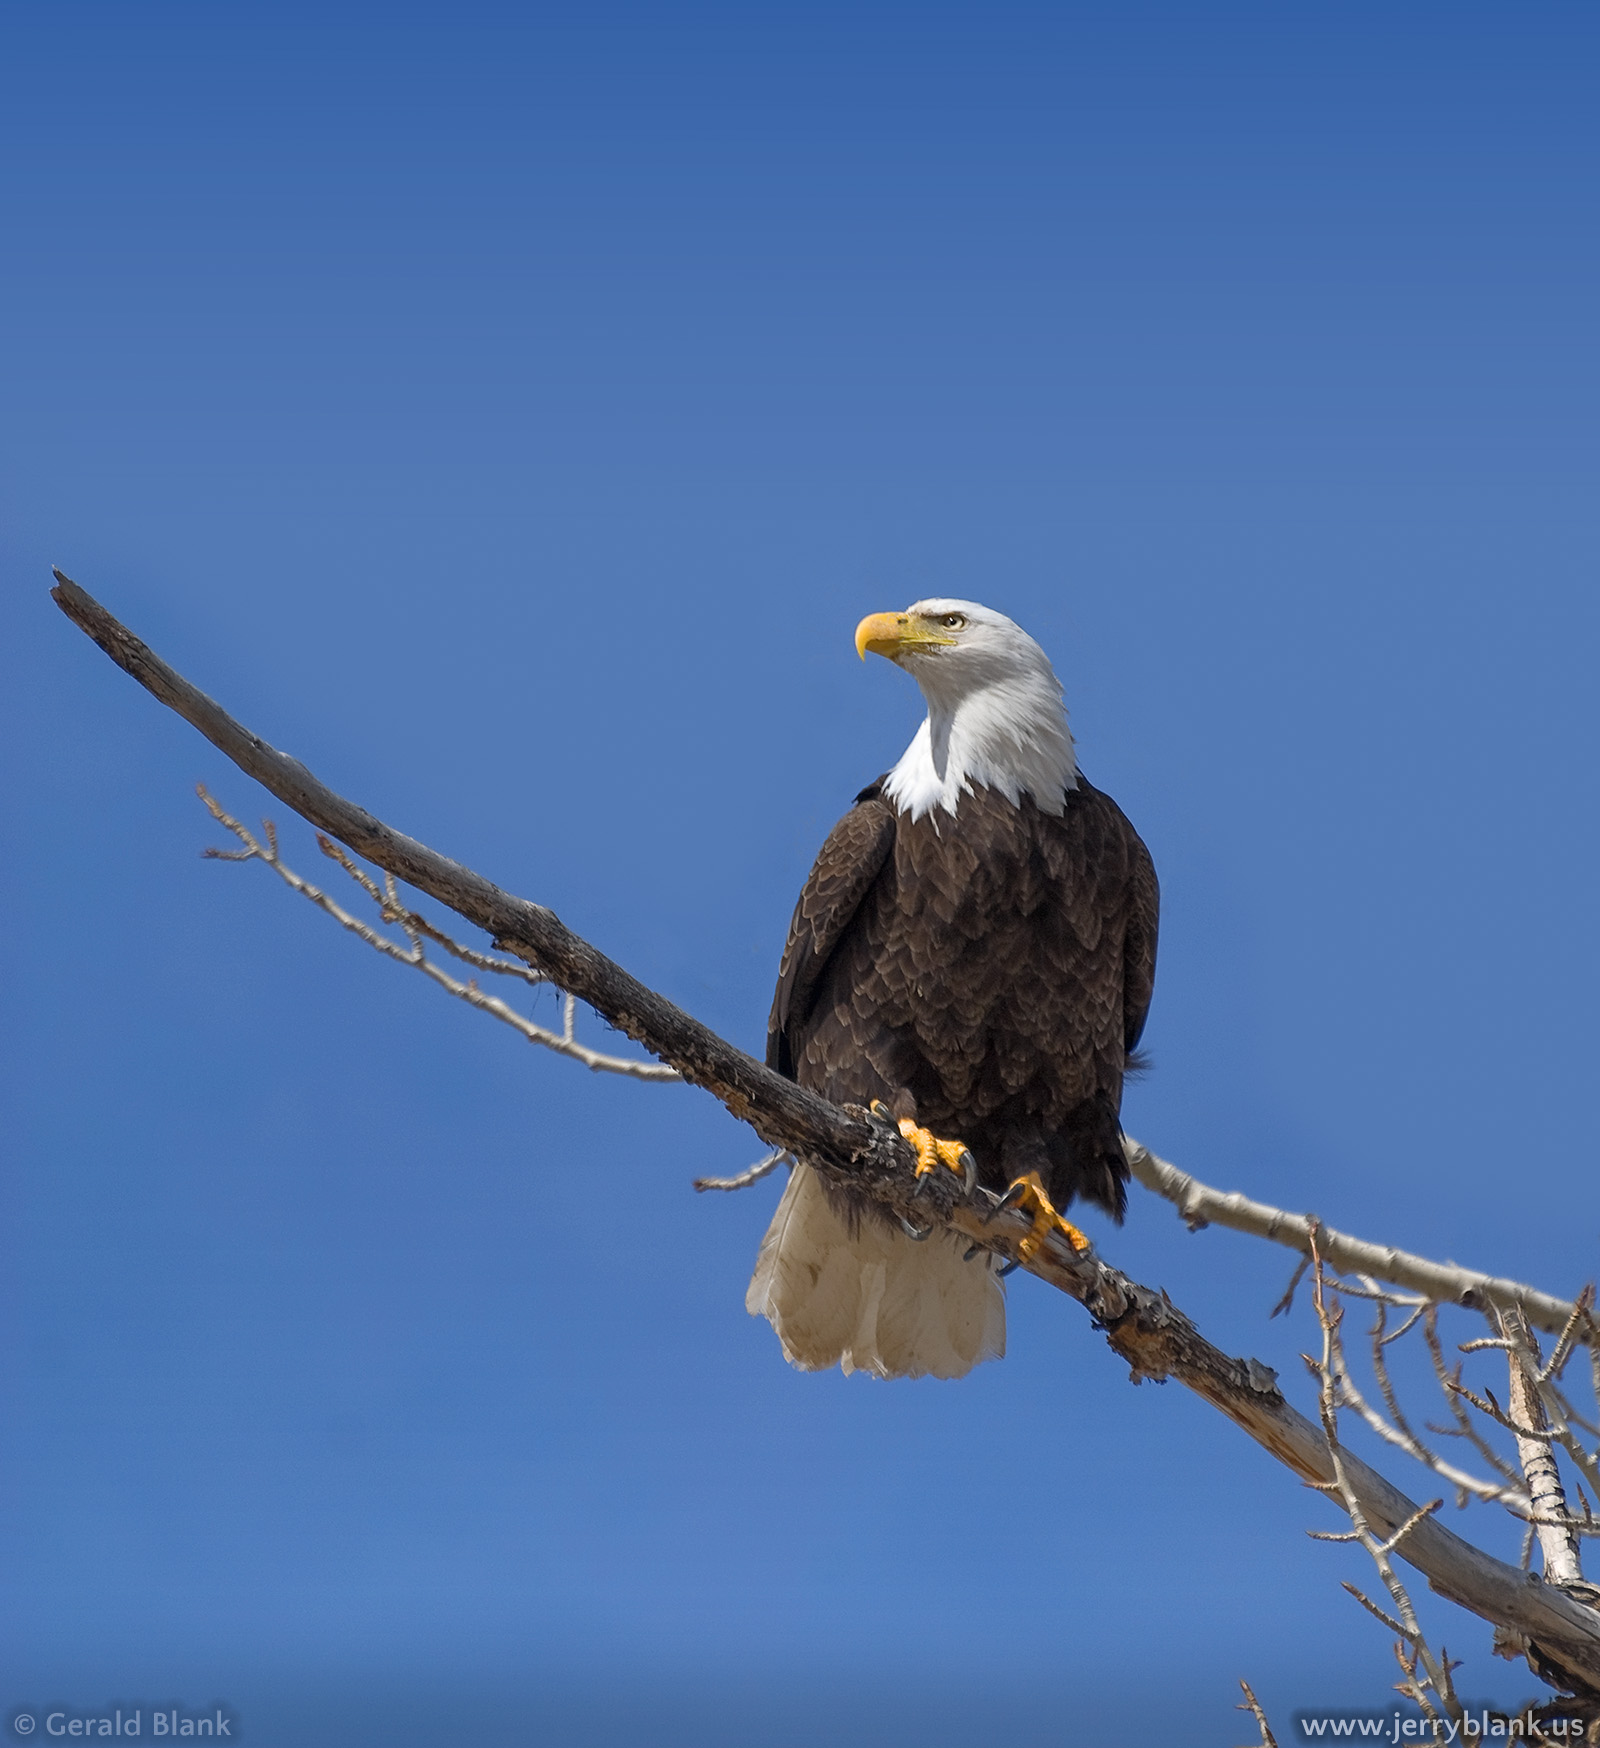 #07306 - Bald eagle at Mill Creek, north of Yellowstone National Park, Montana - photo by Jerry Blank